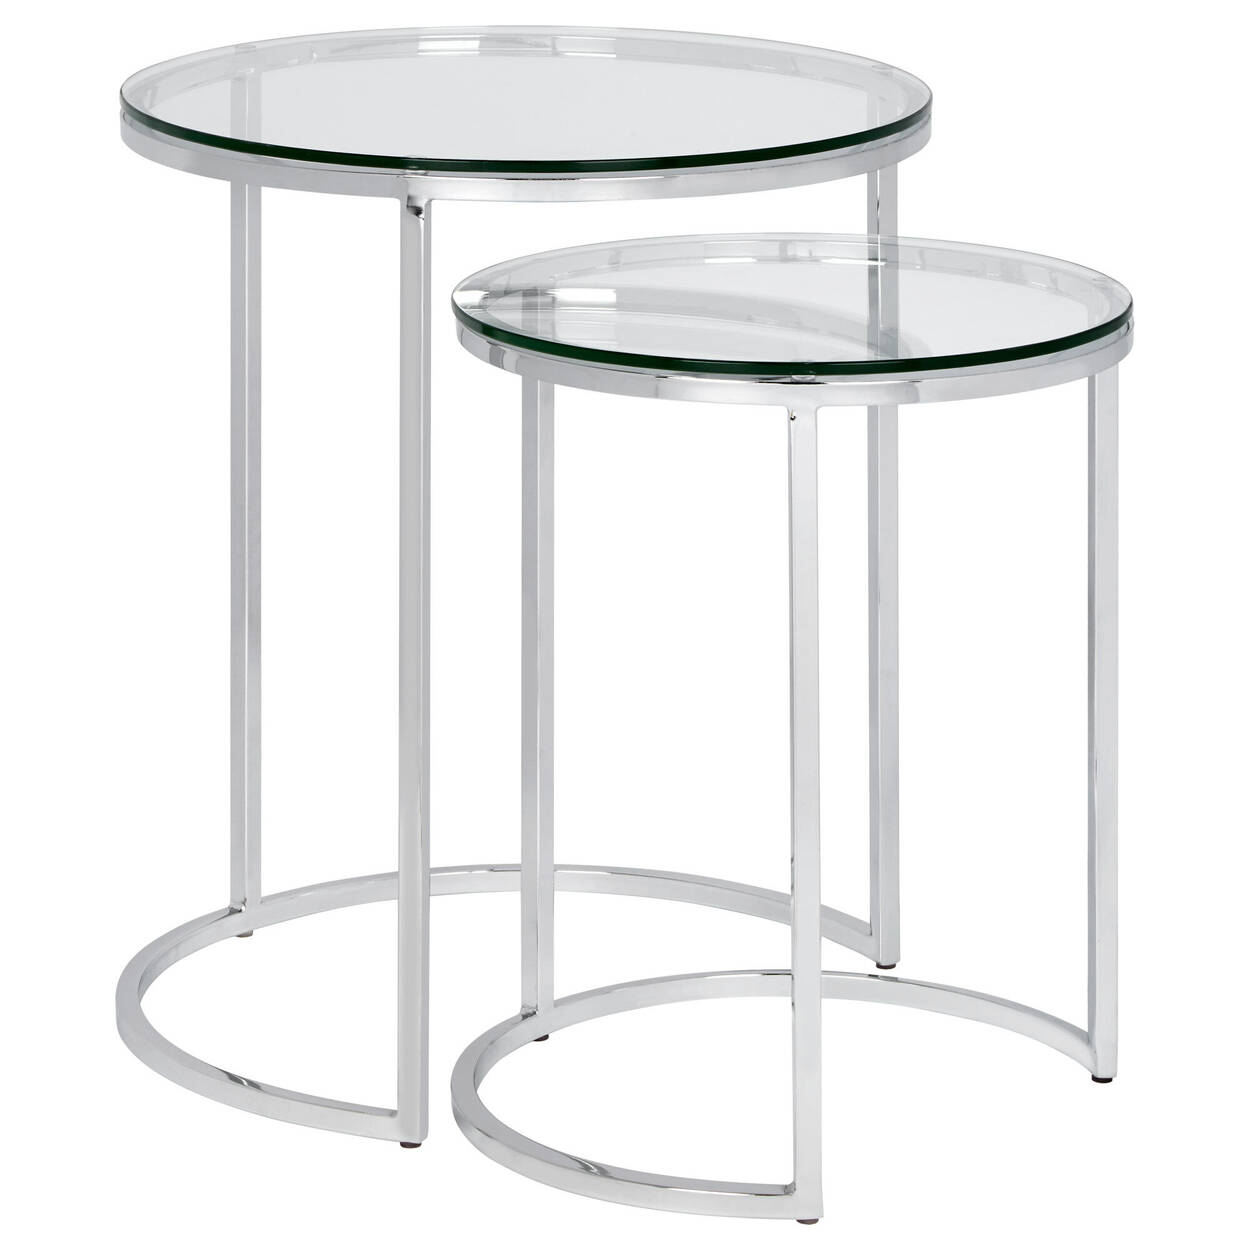 Set of 2 Tempered Glass Side Tables with Metal Legs | Bouclair Canada